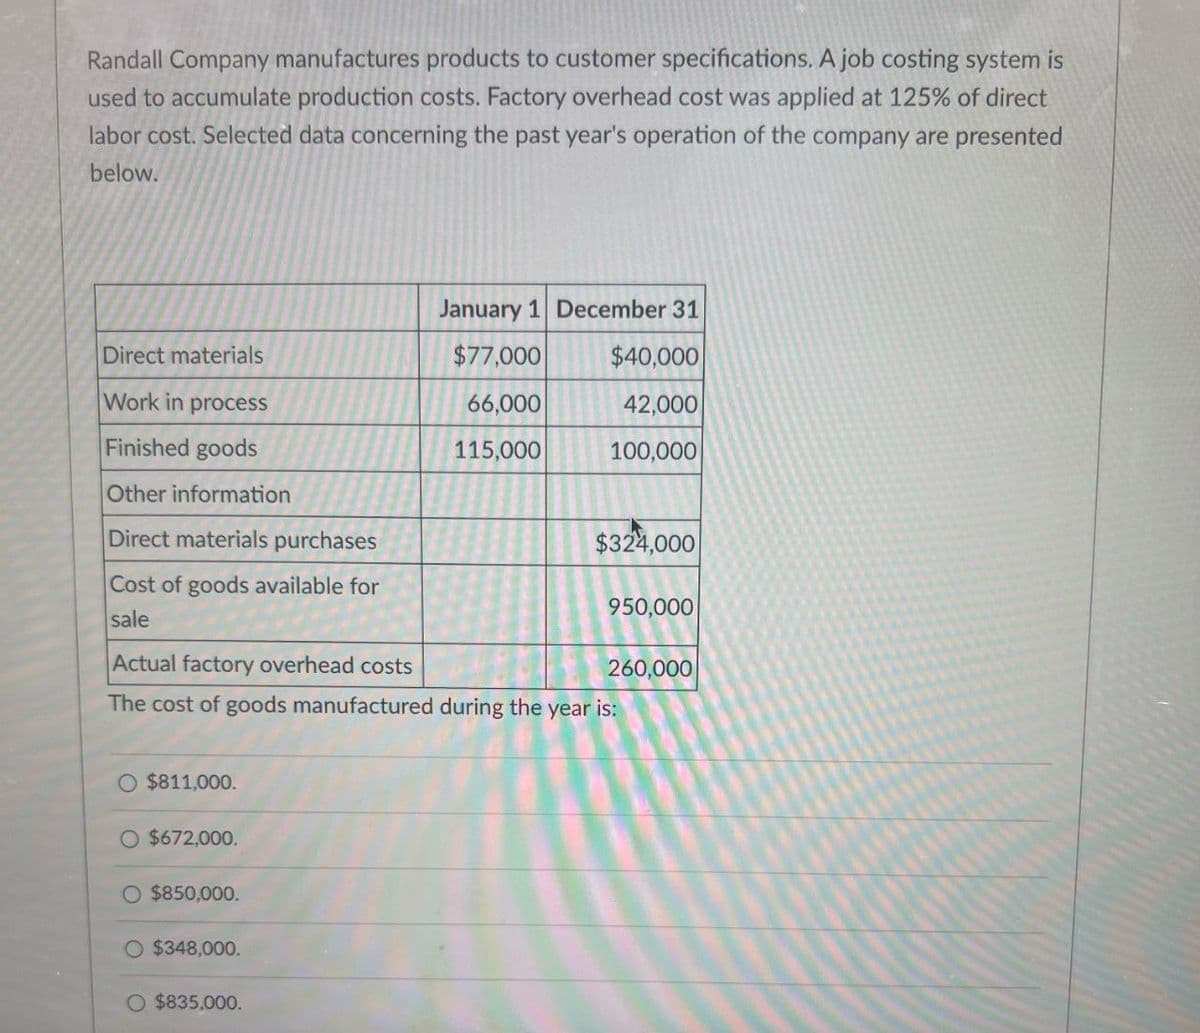 Randall Company manufactures products to customer specifications. A job costing system is
used to accumulate production costs. Factory overhead cost was applied at 125% of direct
labor cost. Selected data concerning the past year's operation of the company are presented
below.
January 1 December 31
Direct materials
$77,000
$40,000
Work in process
66,000
42,000
Finished goods
115,000
100,000
Other information
Direct materials purchases
Cost of goods available for
sale
Actual factory overhead costs
$324,000
950,000
260,000
The cost of goods manufactured during the year is:
$811,000.
O $672,000.
O $850,000.
O $348,000.
$835,000.